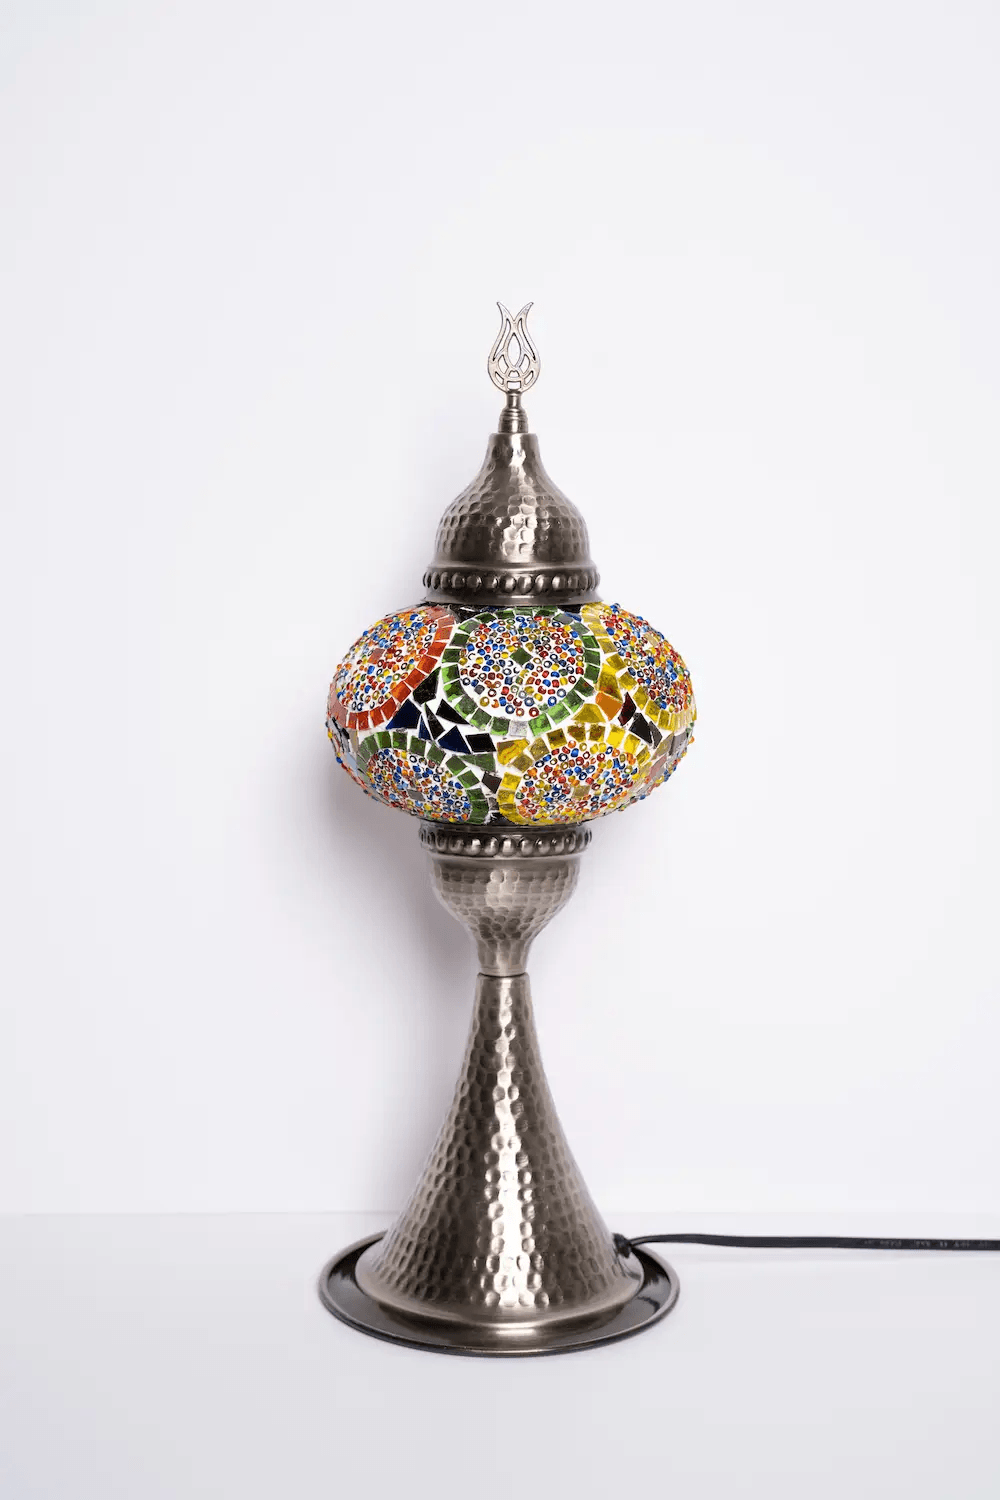 Elite Turkish Mosaic Glass Decorative Table Lamps - Multicolor Separated Circles - Unique Custom Moroccan Lamp Shades - KAFTHAN